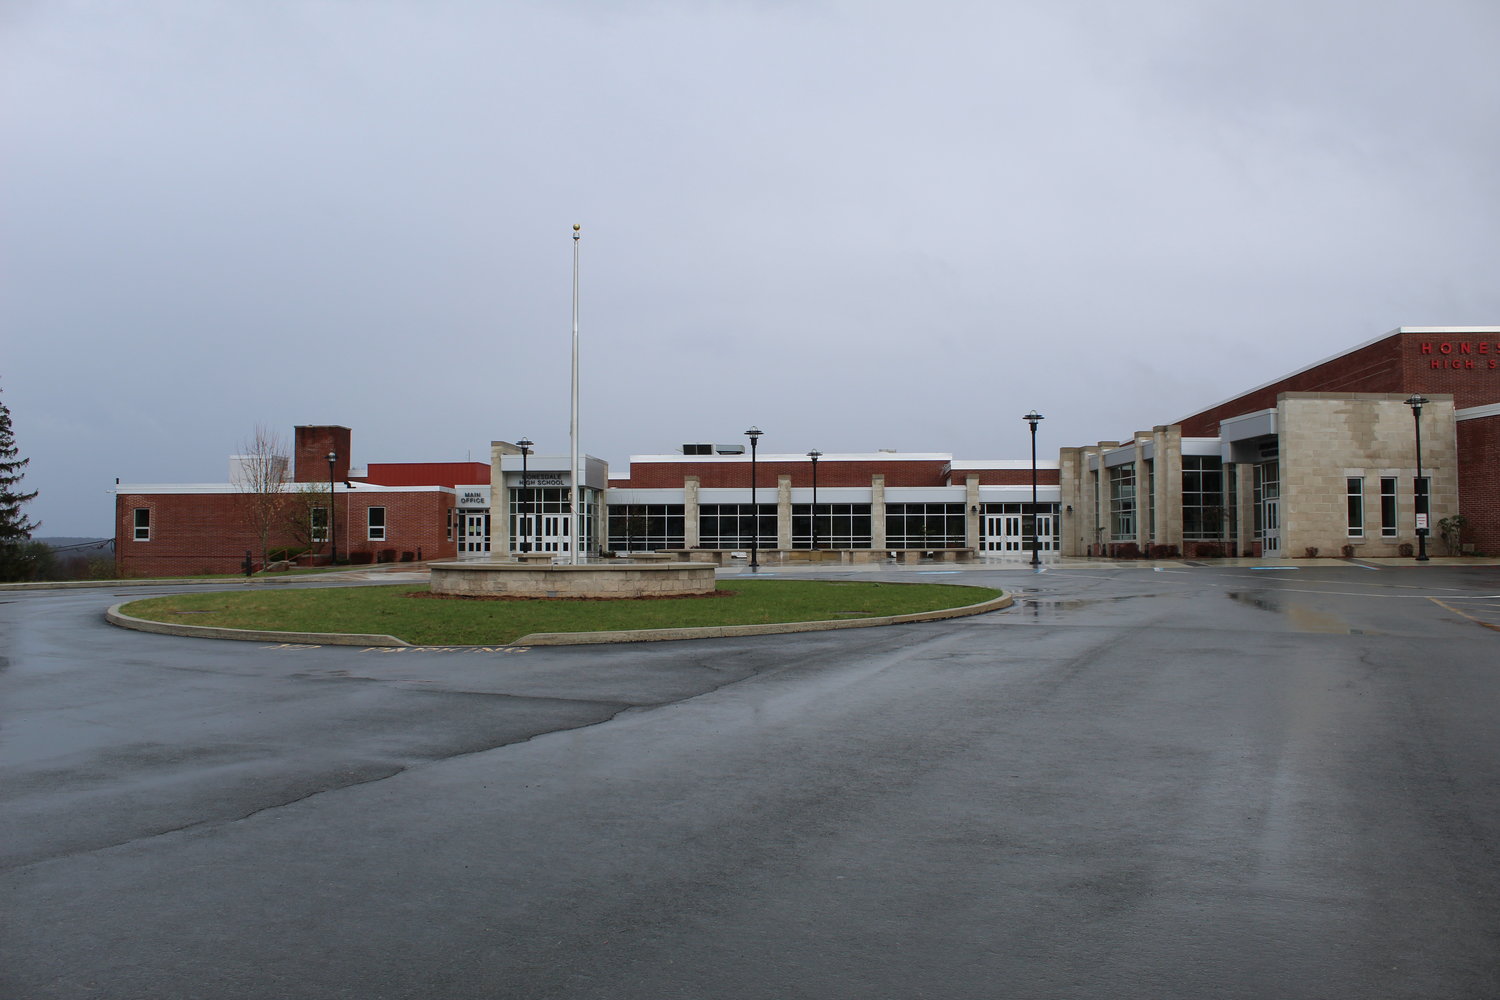 Honesdale High School stands empty, waiting for its students to return.